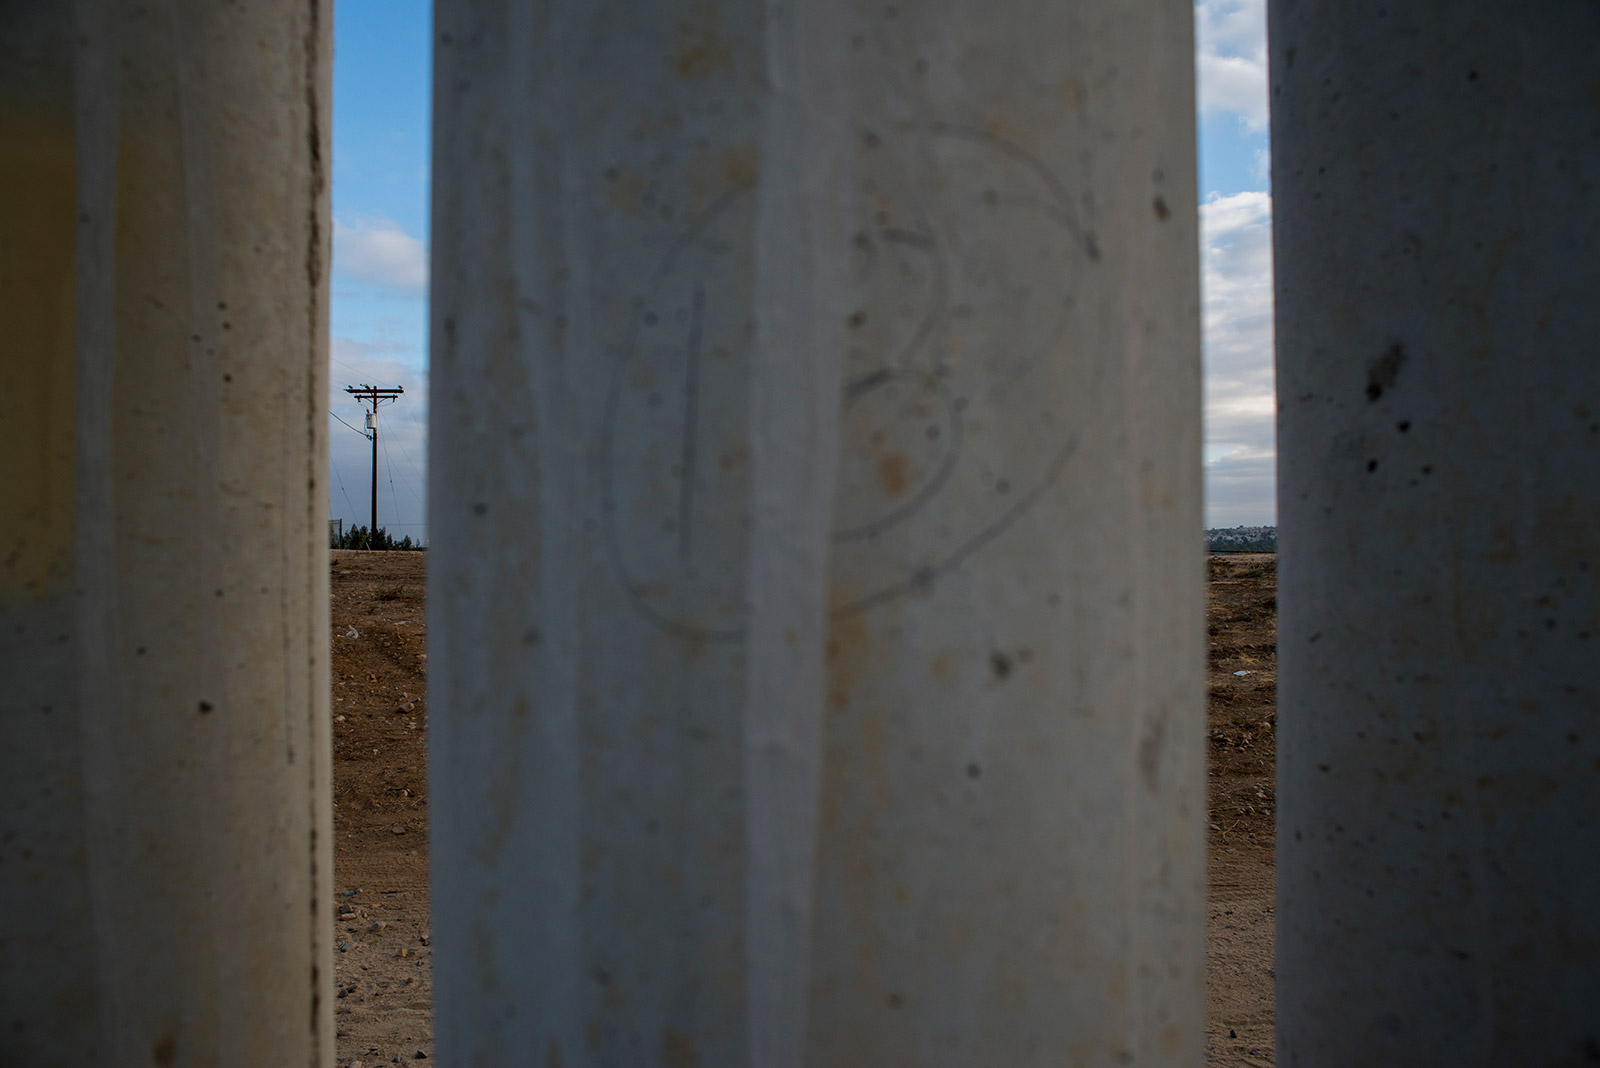 This variation of secondary fencing between the Pacific Ocean and the San Ysidro Port of Entry is made of tall concrete pillars and is topped with metal sheeting. This fencing, shown on Aug. 16, 2017, is designed to stop people and vehicles from entering the U.S. illegally. <em>(Brandon Quester/inewsource)</em>